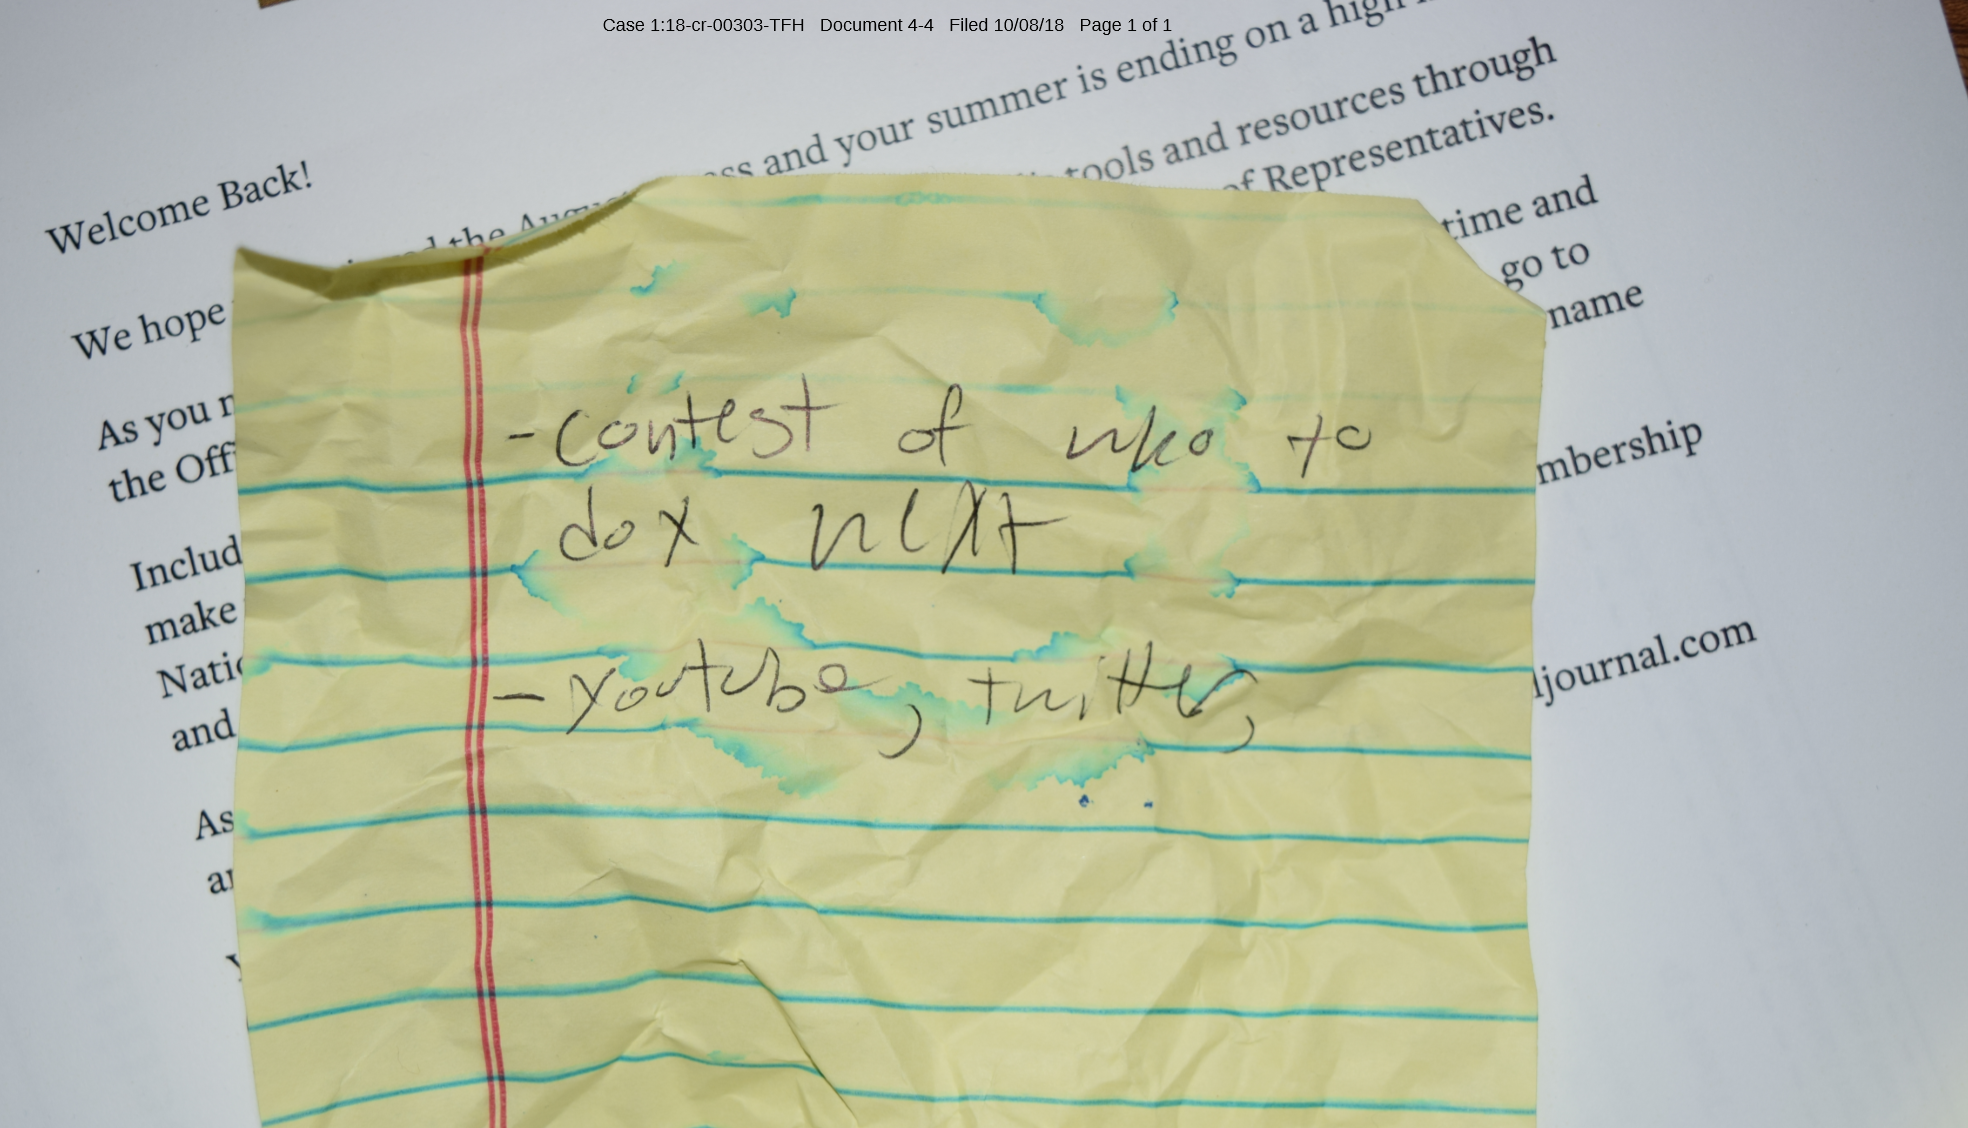 Note found in Jackson Cosko's apartment / Court documents